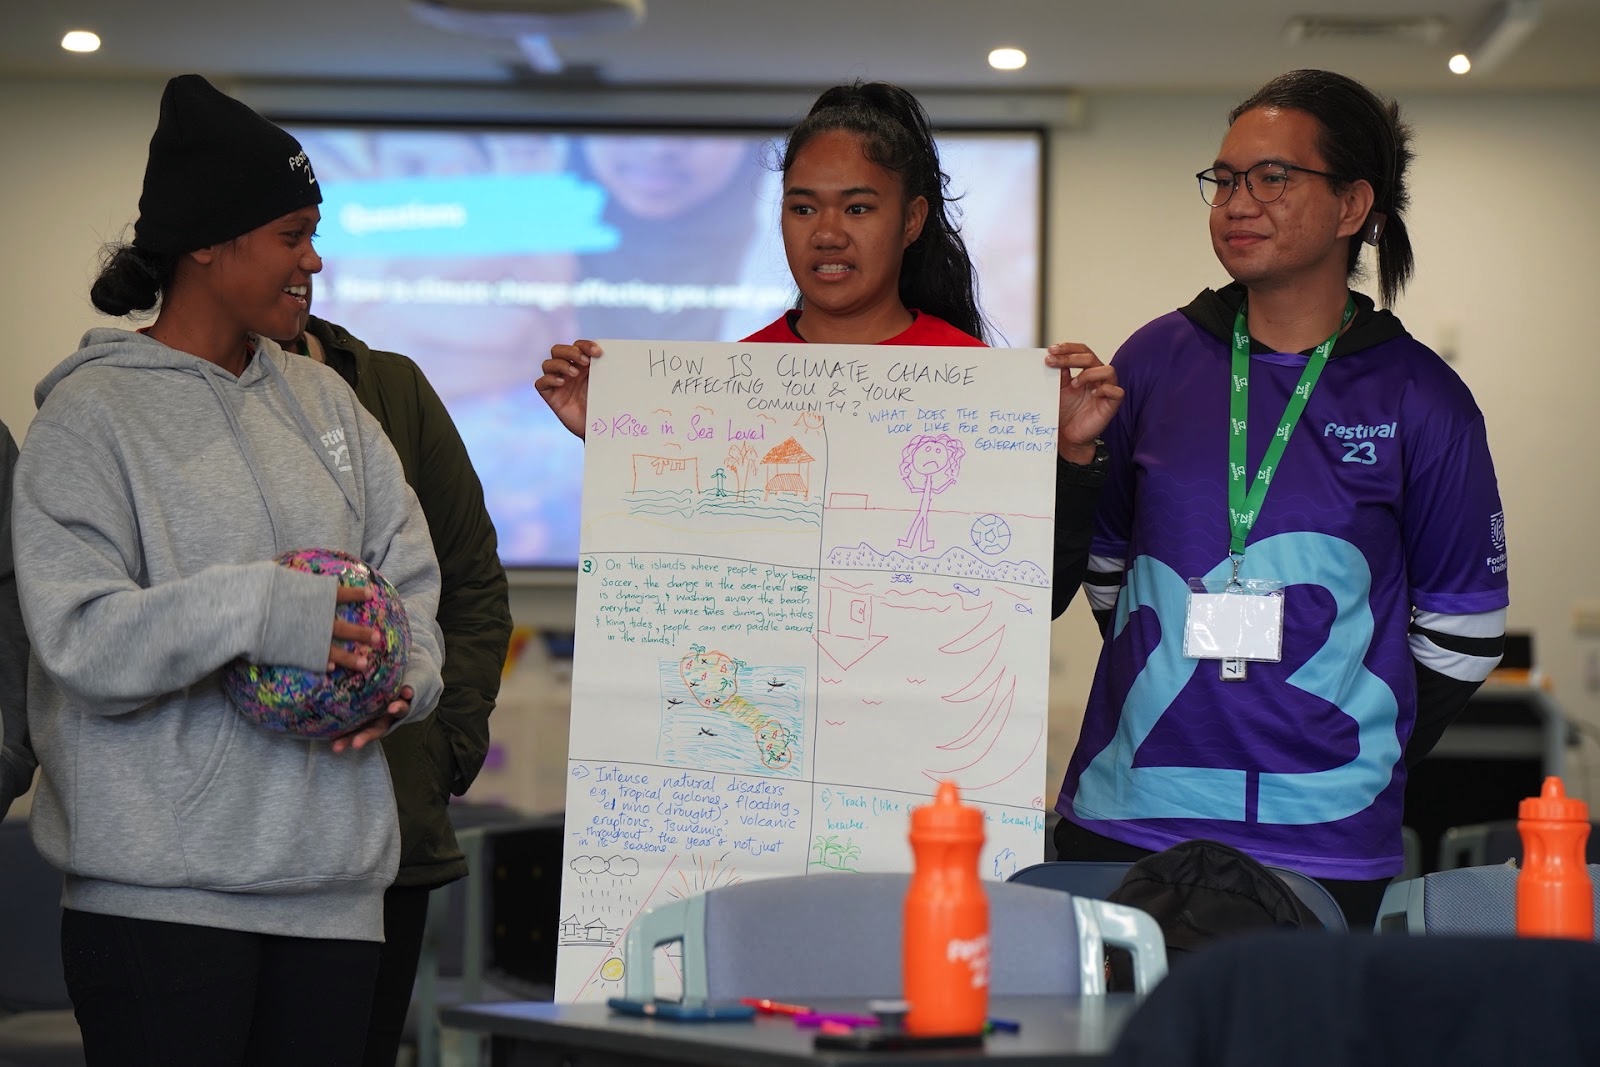 How does Climate Change affect your community? For example, in the Pacific?